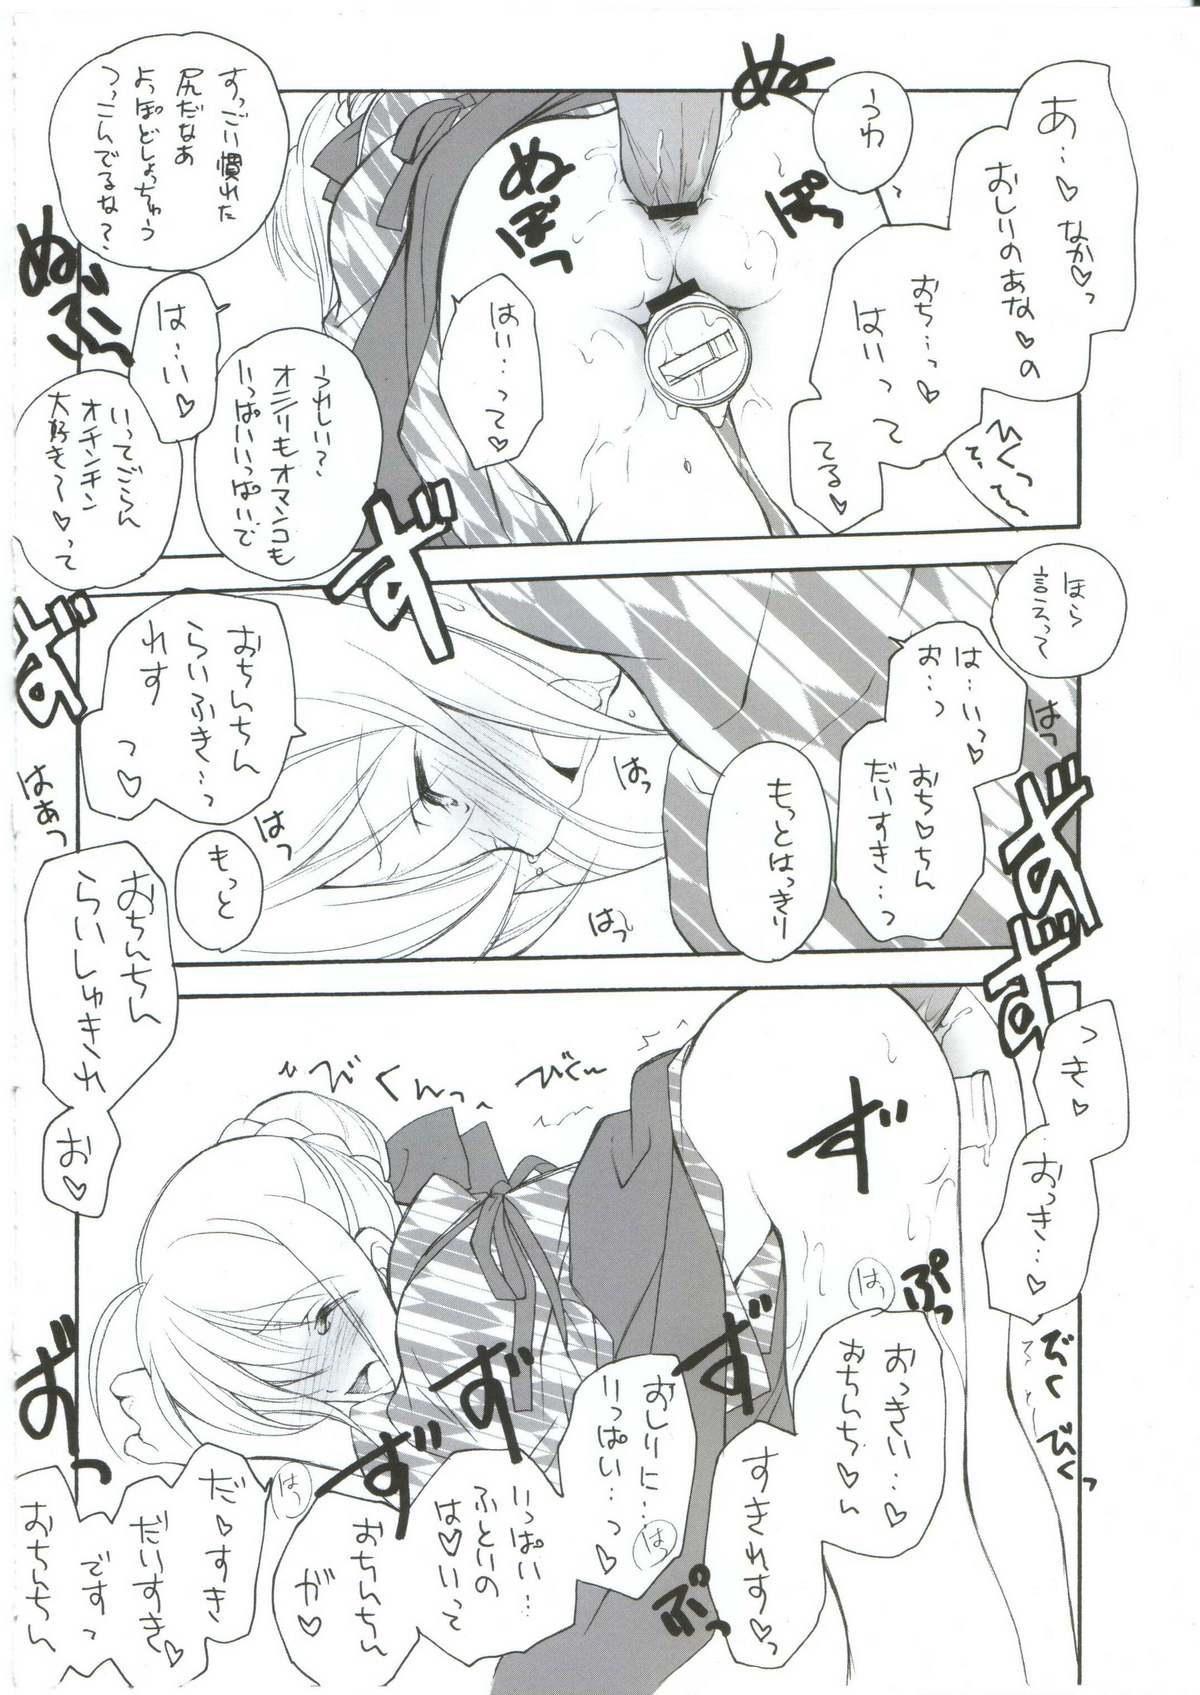 Cop Citron Ribbon 9 - Fate stay night Sexy Whores - Page 7